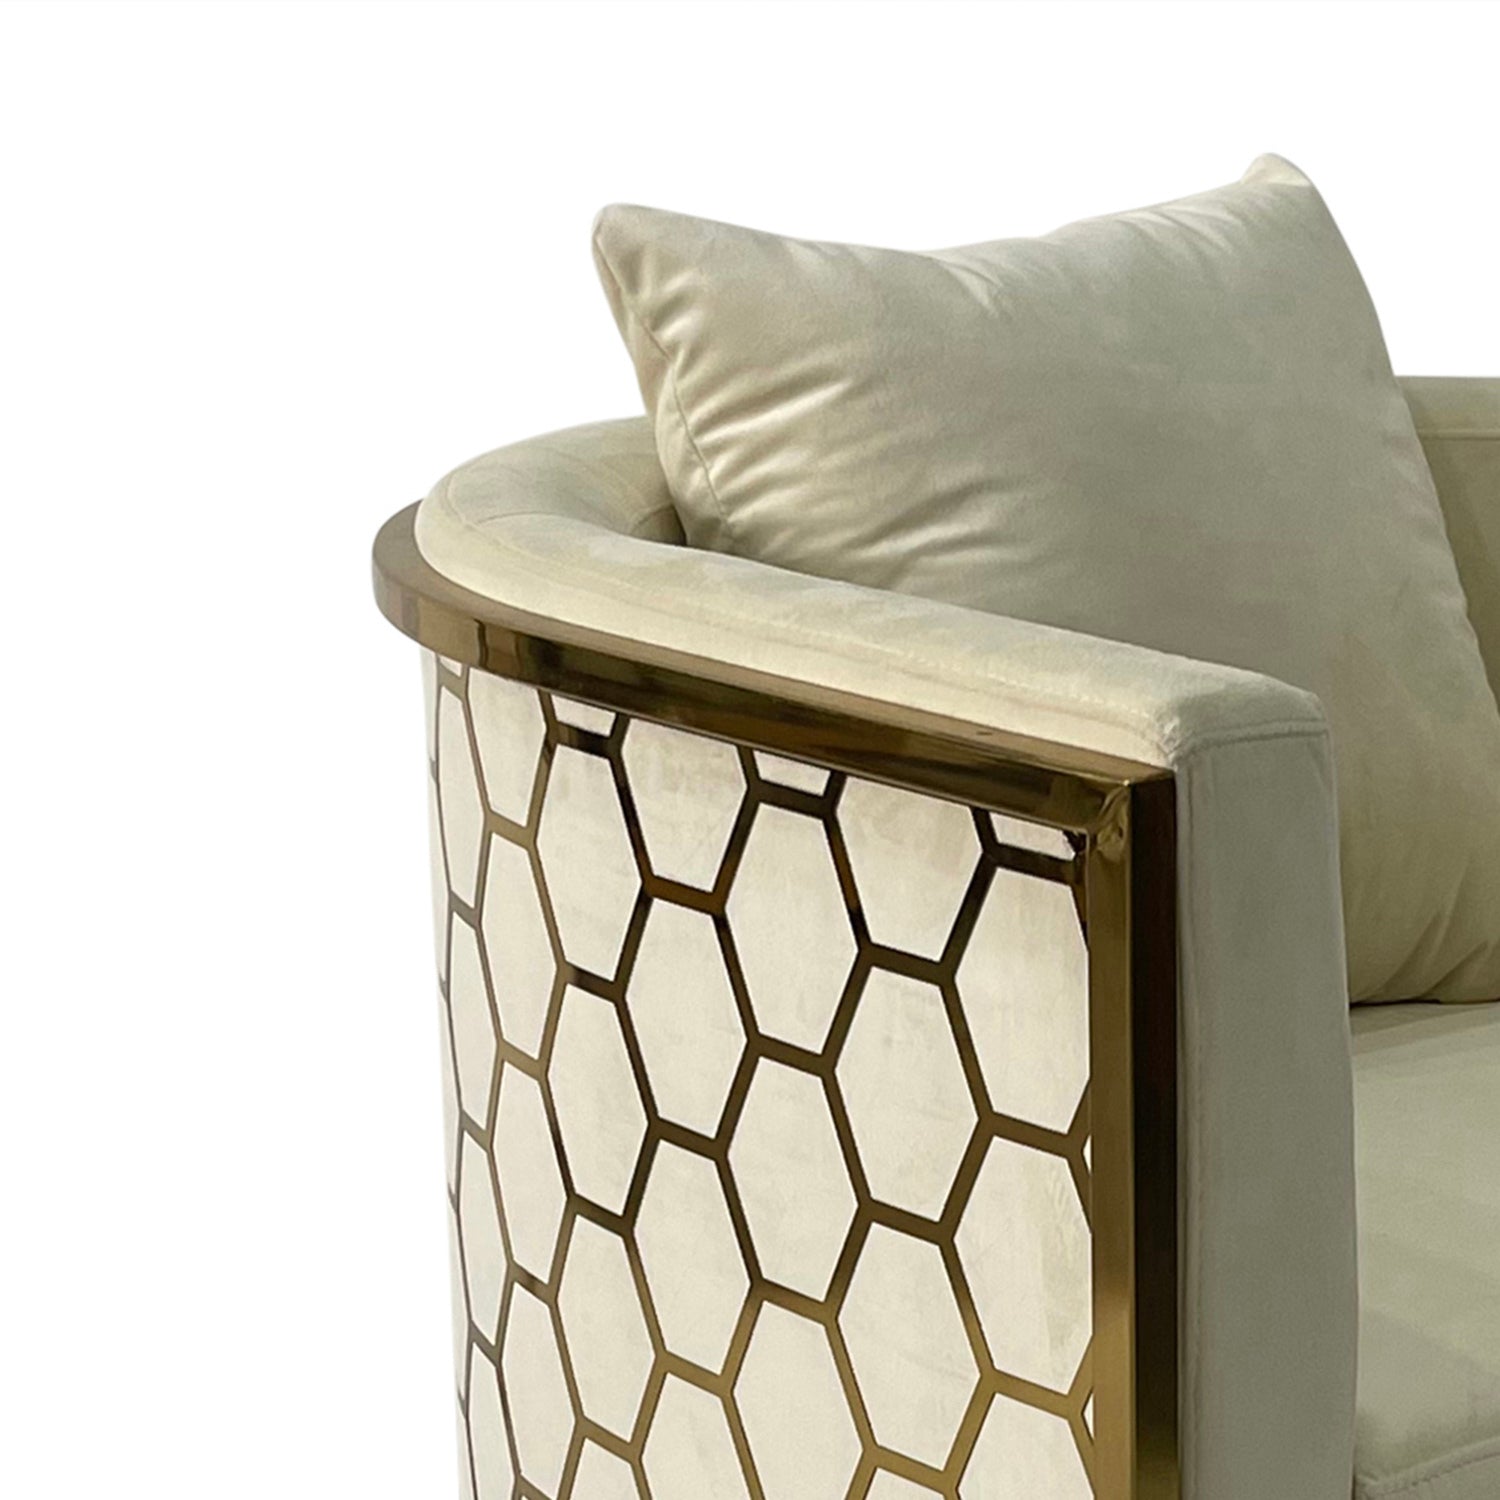 Beige and Gold Sofa Chair